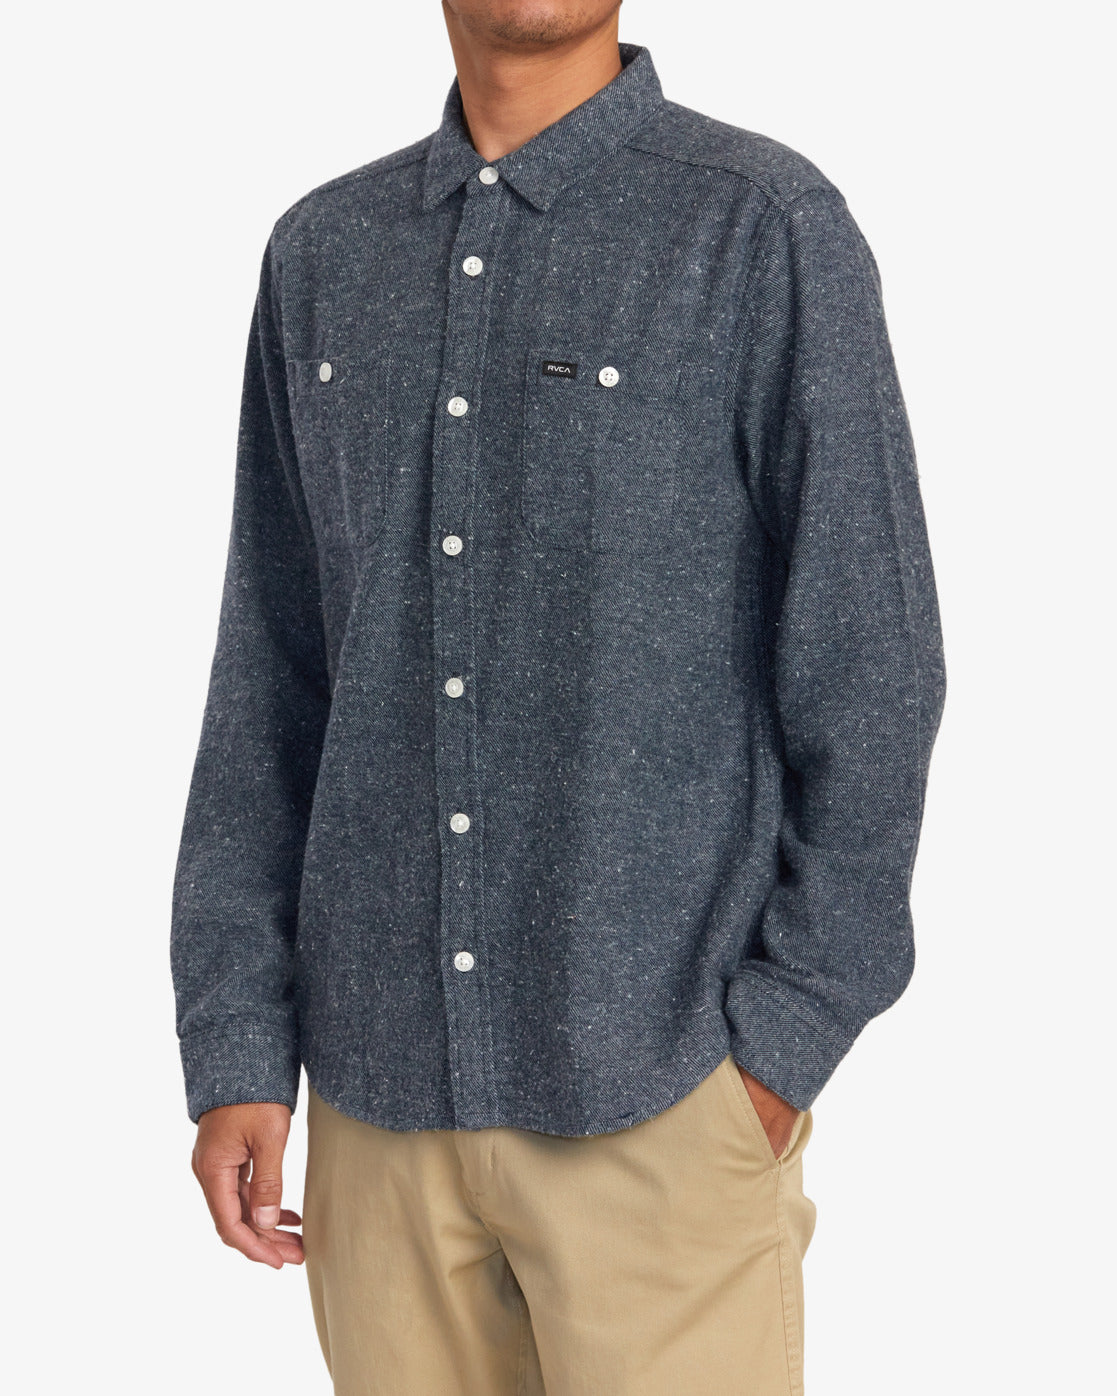 RVCA - Harvest Neps Flannel Shirt